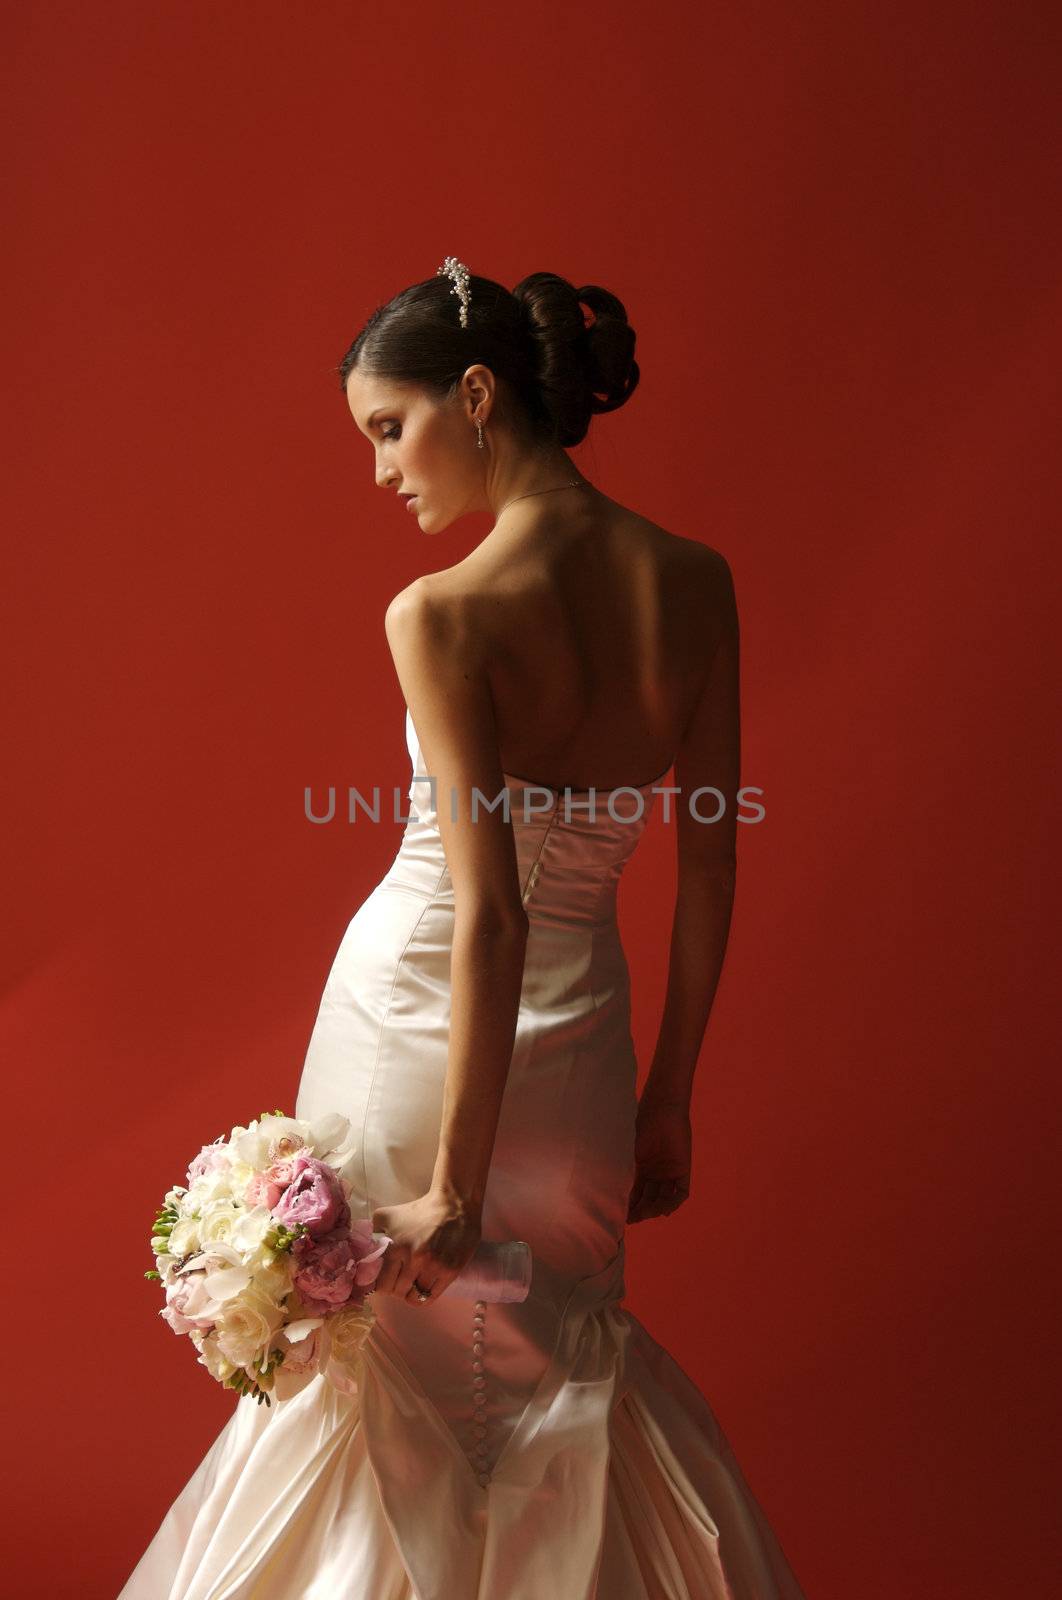 Image of a bride with body turned toward red wall looking down and to the side at bouquet